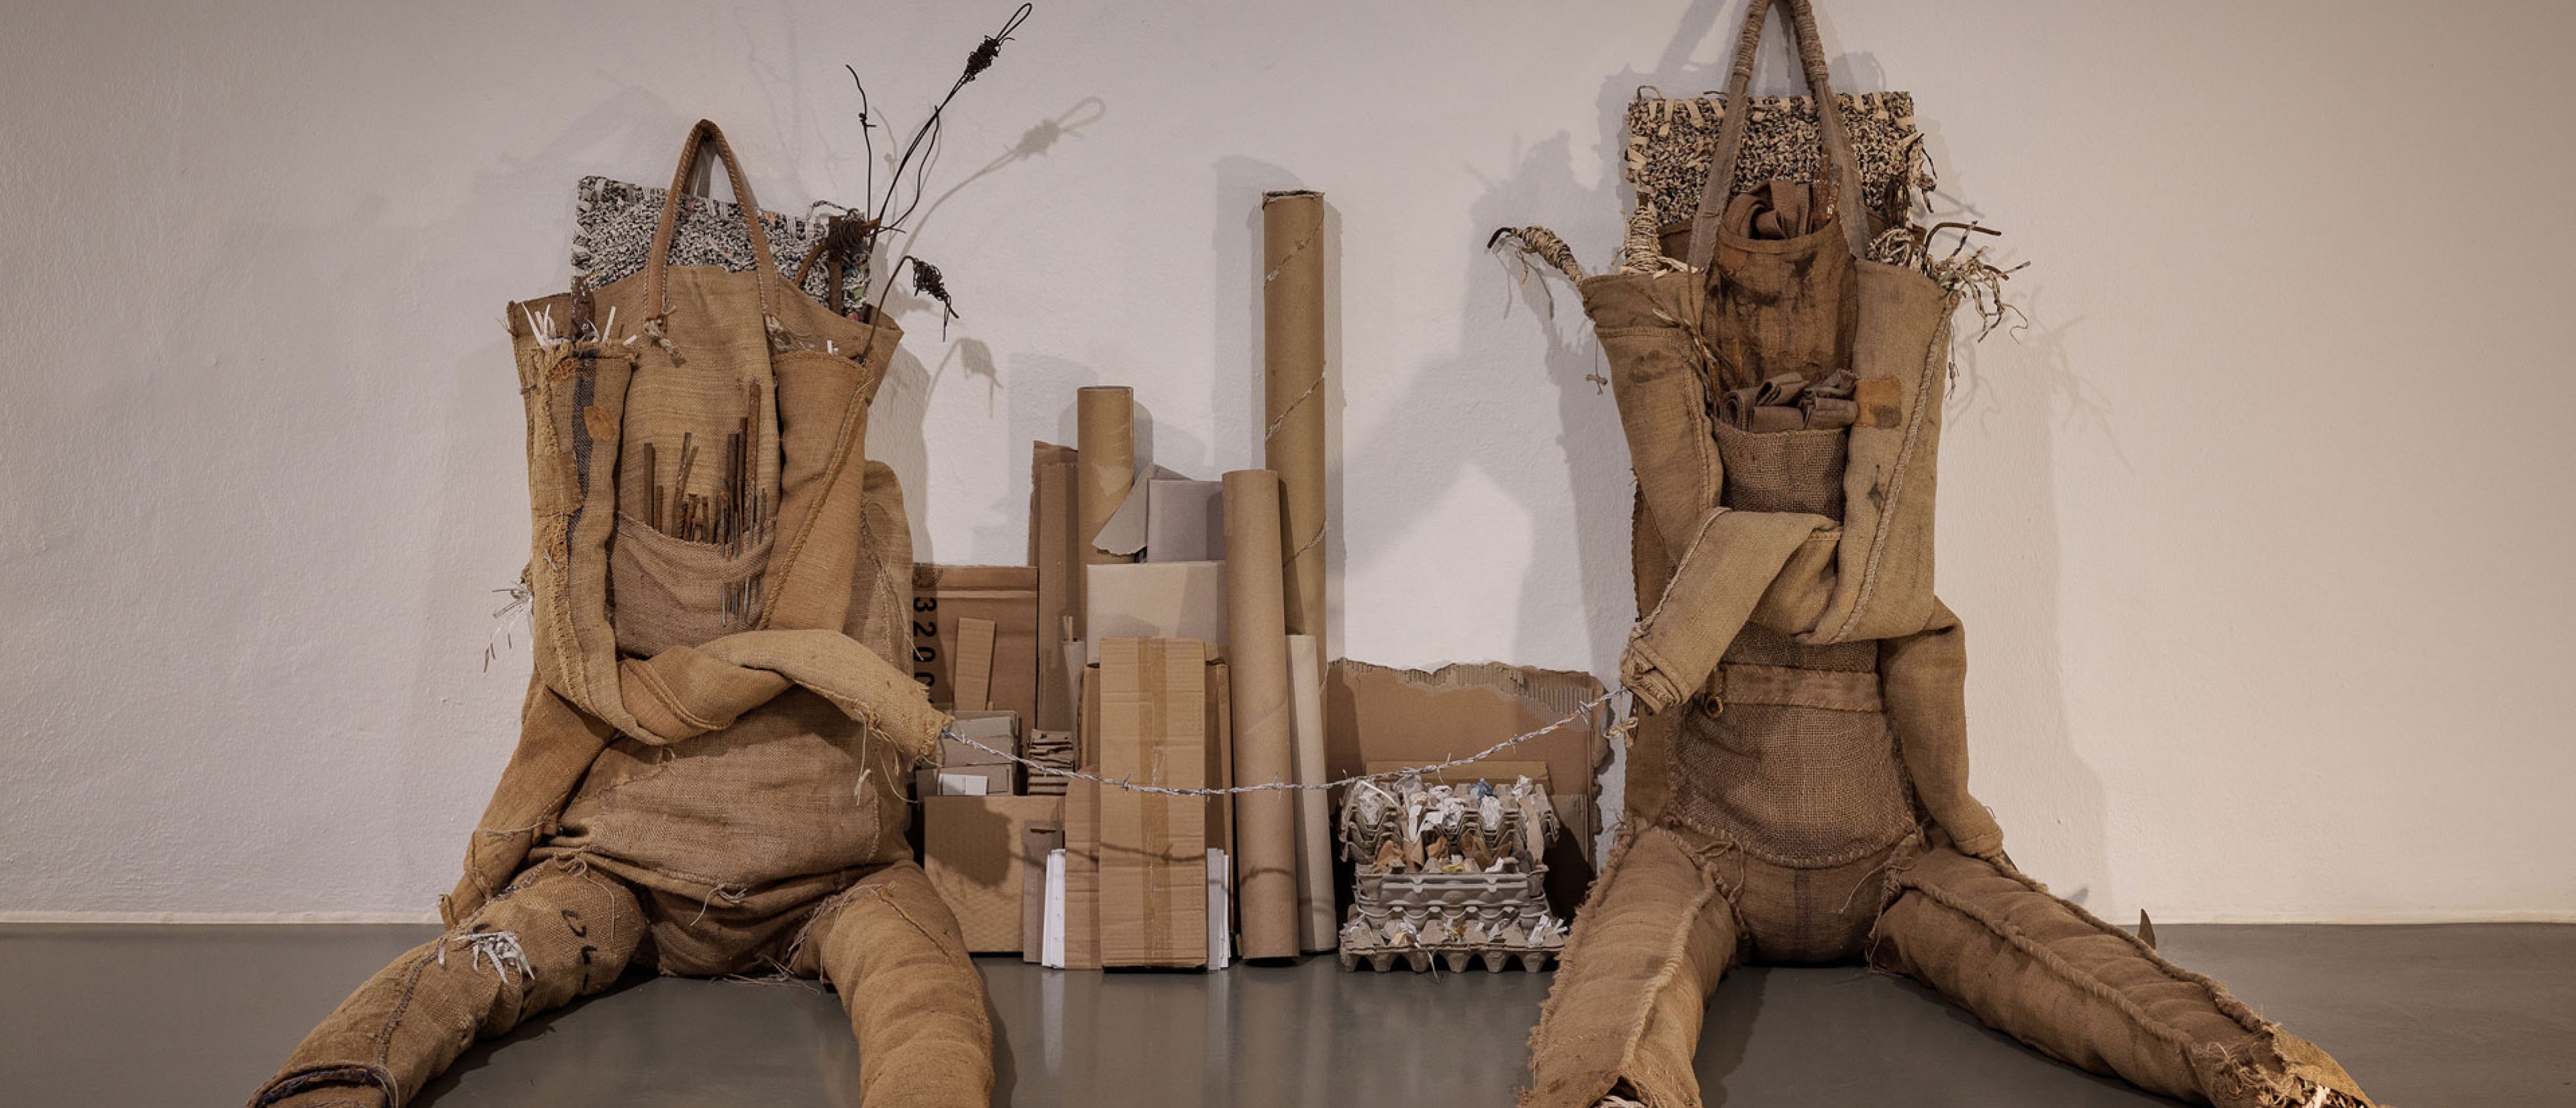 Two scupltures made of jute bags leaning against a wall. 